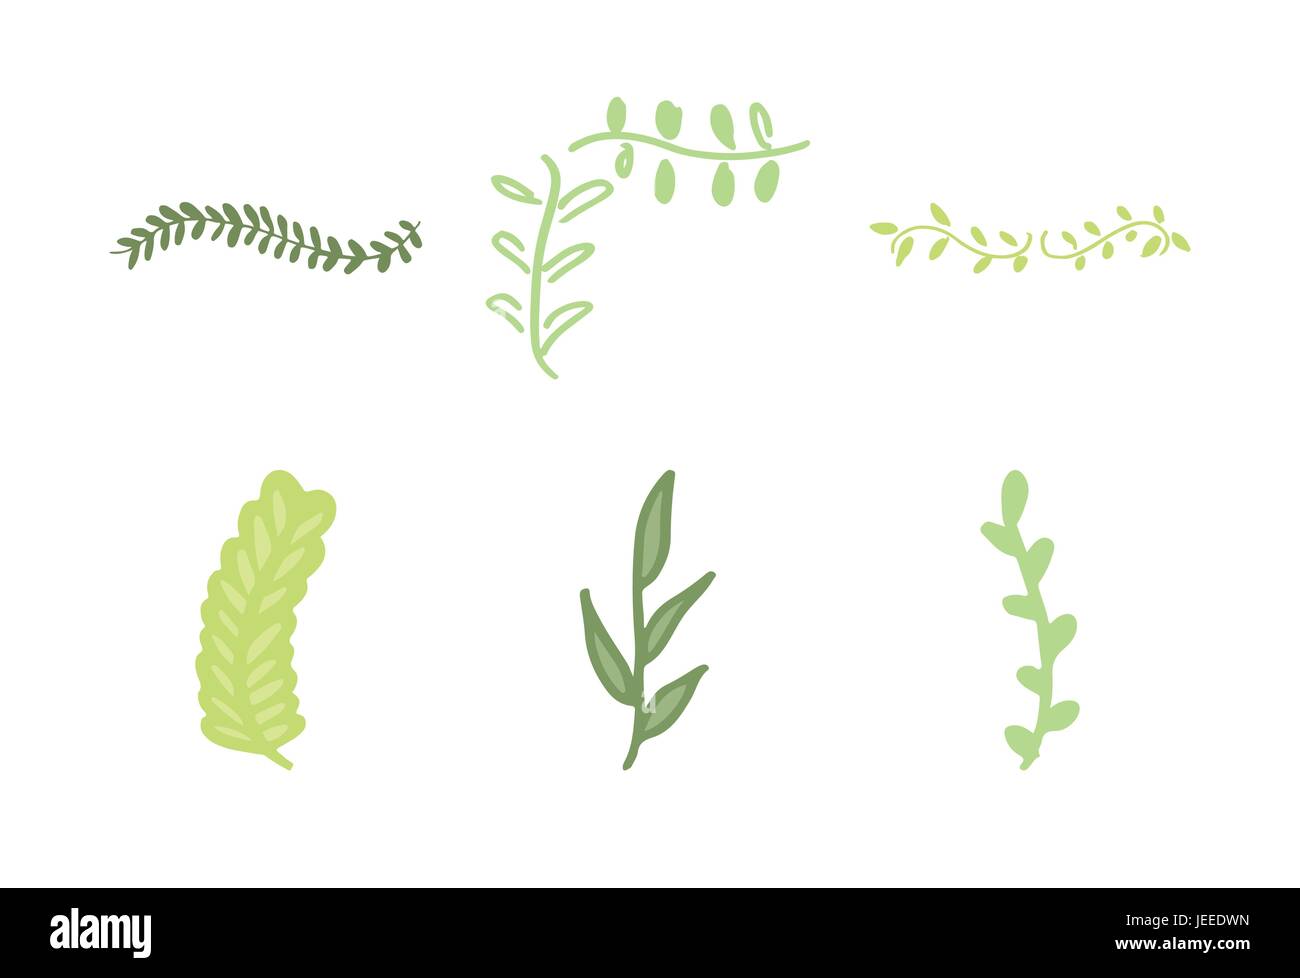 Vector icon of various leaves Stock Vector